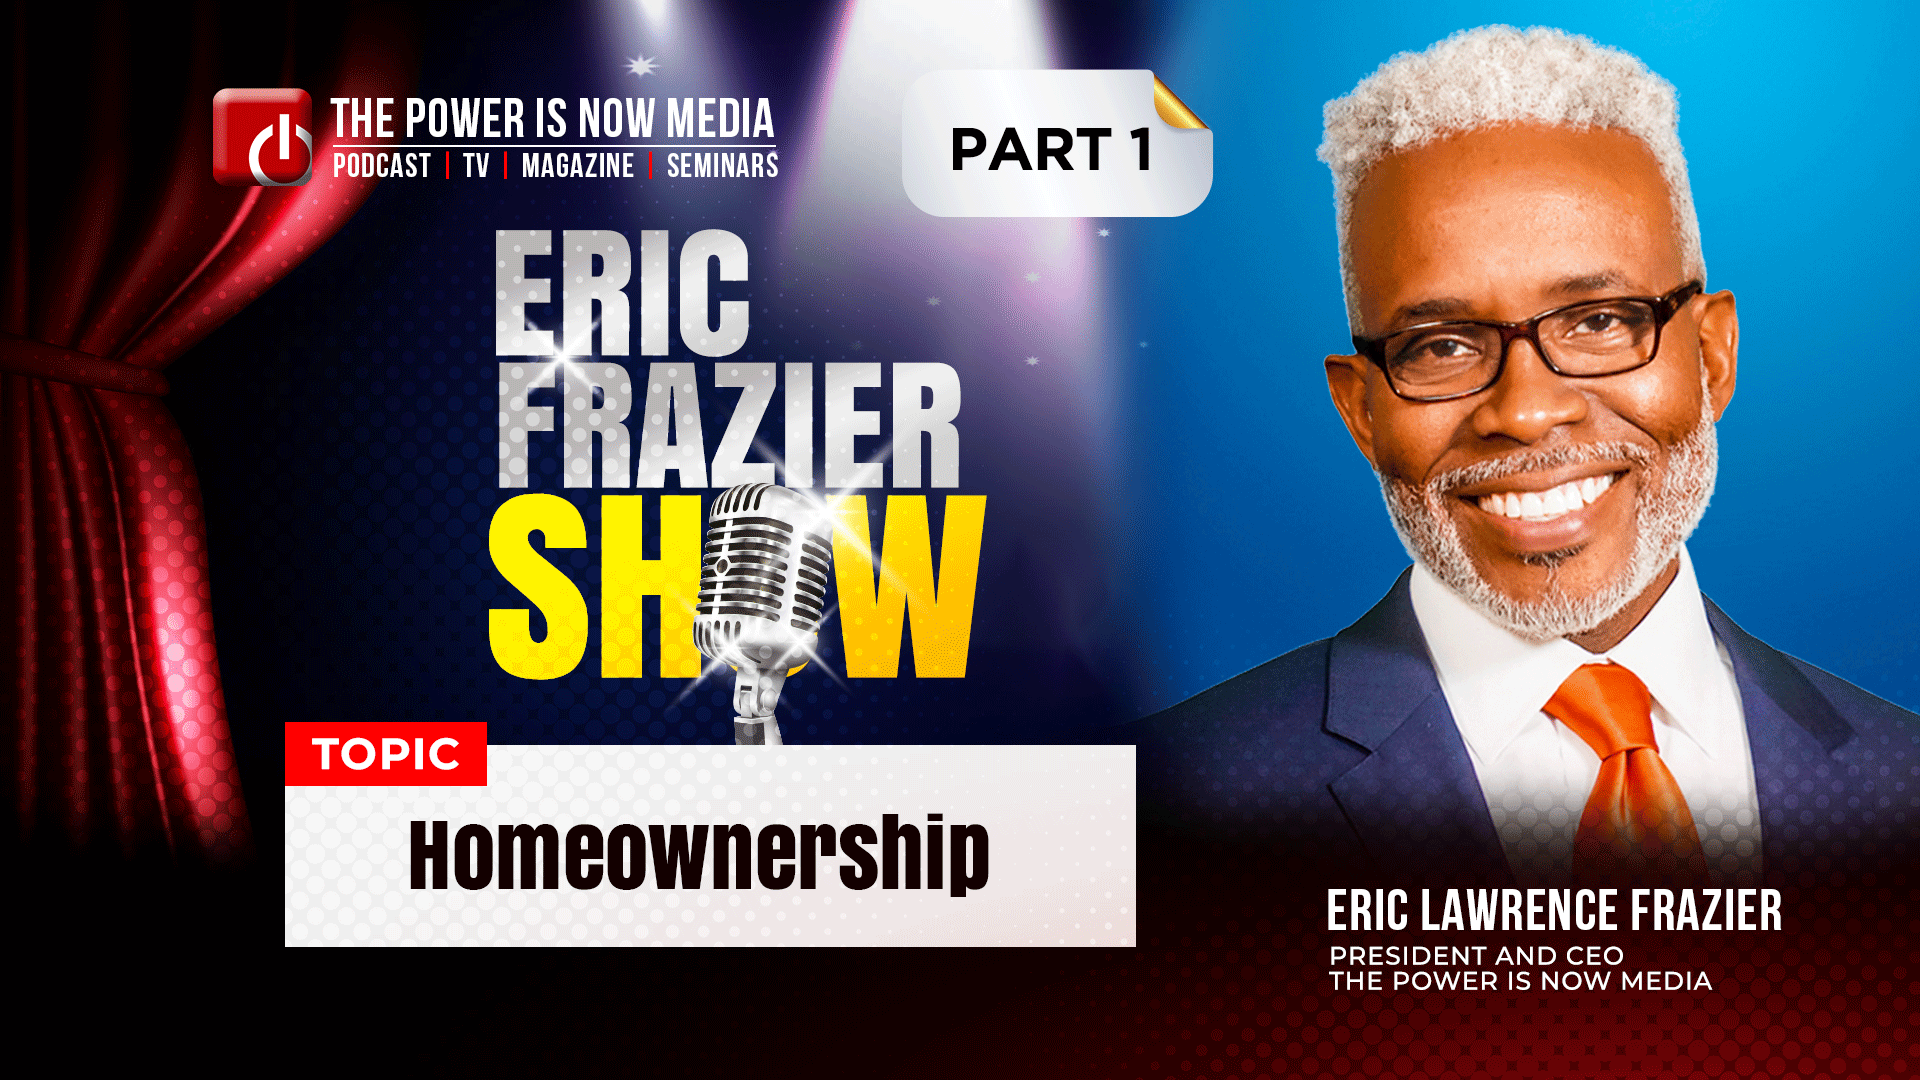 The Eric Frazier Show Homeownership